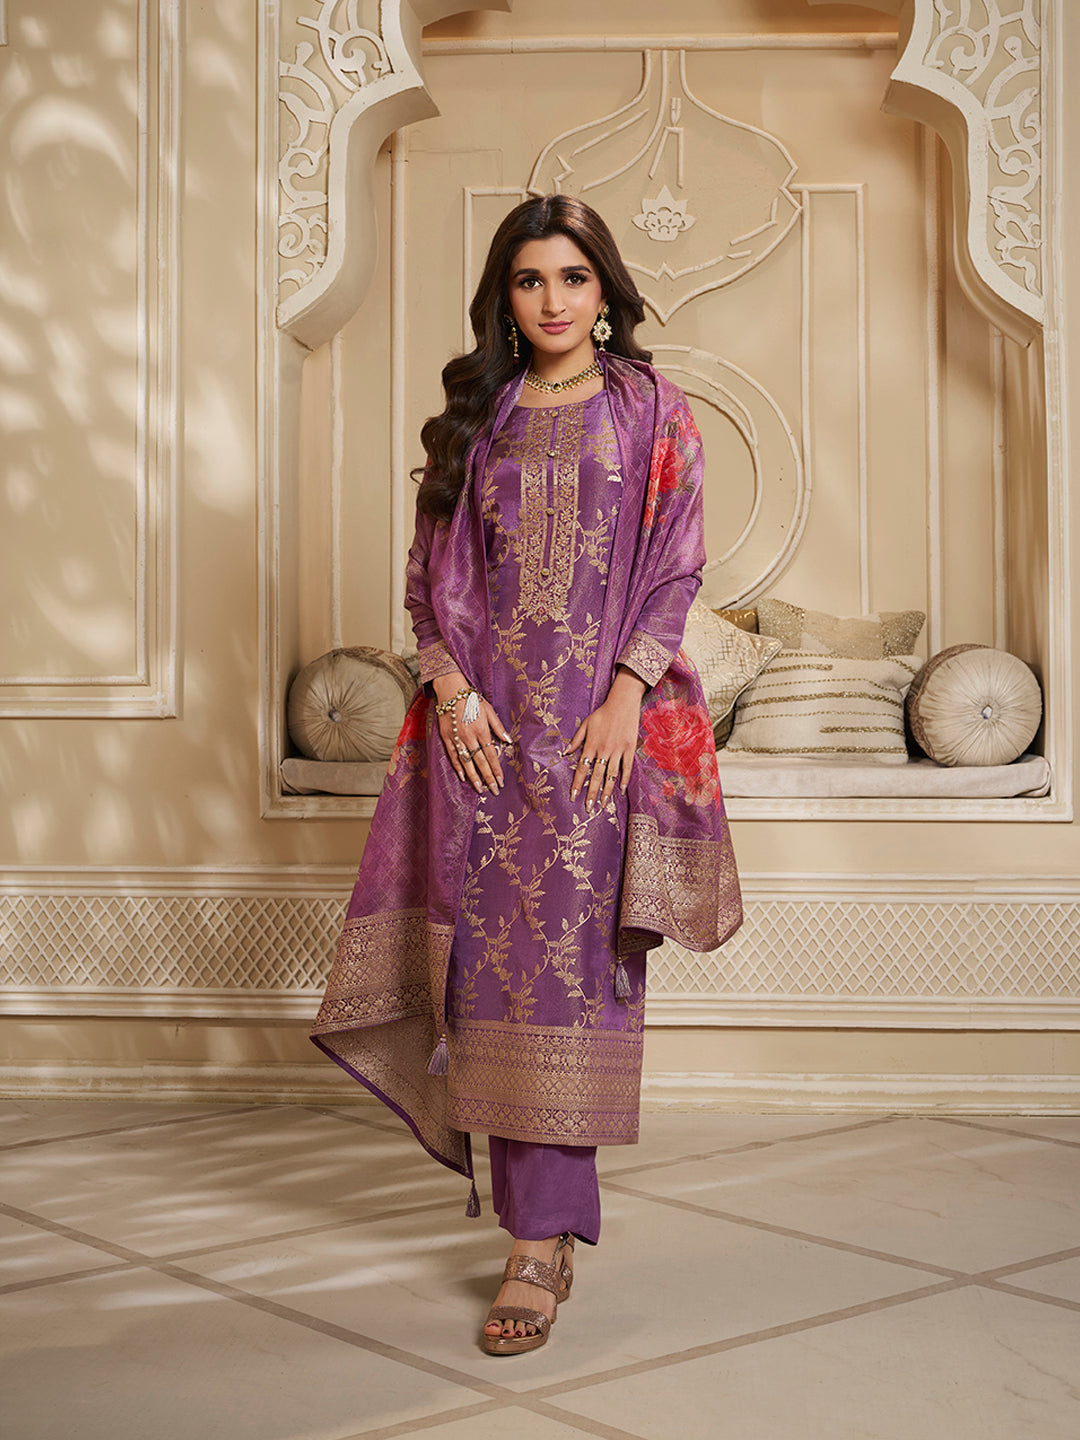 Purple Tissue Jacquard Kurta Suit Set with Jaal Pattern & Hand made Buttons Product vendor